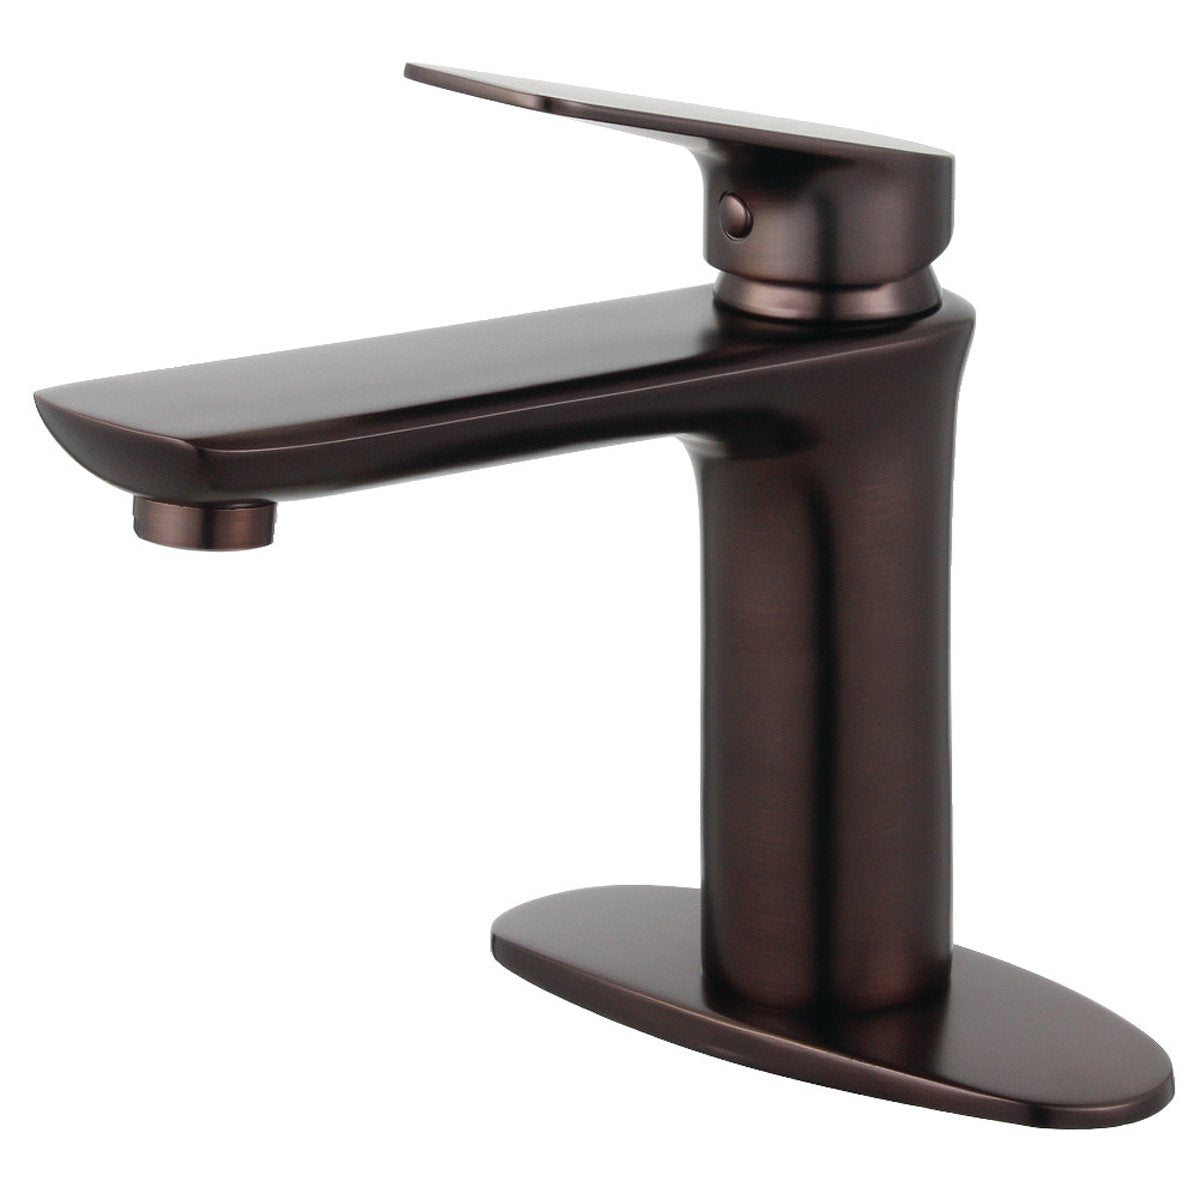 Kingston Brass Fauceture Frankfurt Single-Handle Bathroom Faucet with Deck Plate and Drain